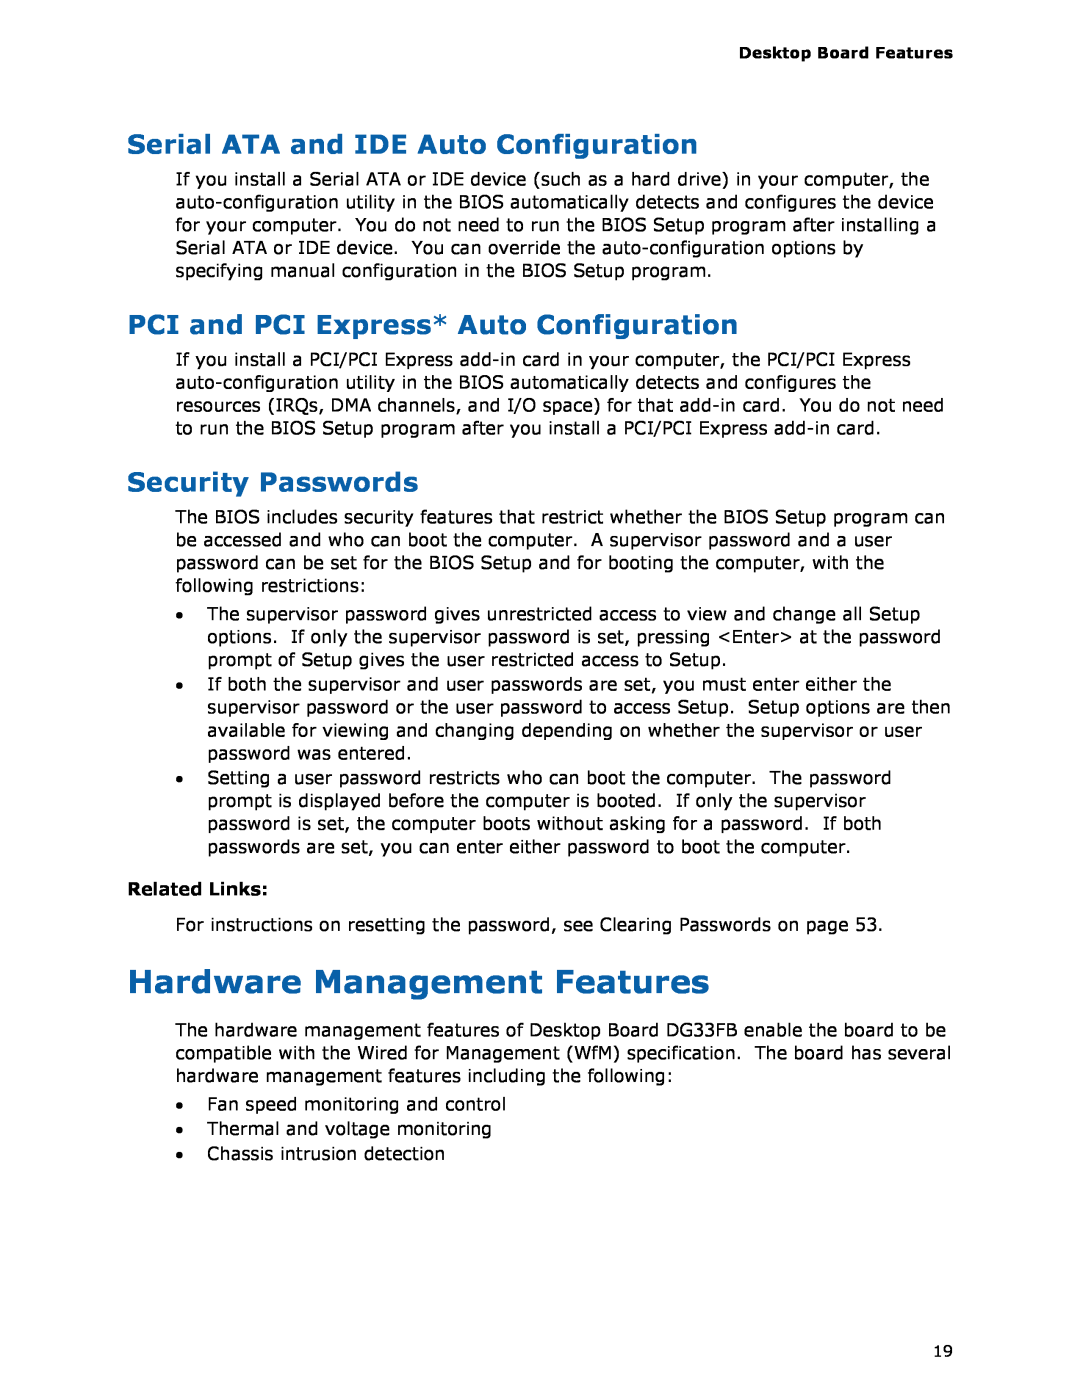 Intel DG33FB Hardware Management Features, Serial ATA and IDE Auto Configuration, PCI and PCI Express* Auto Configuration 